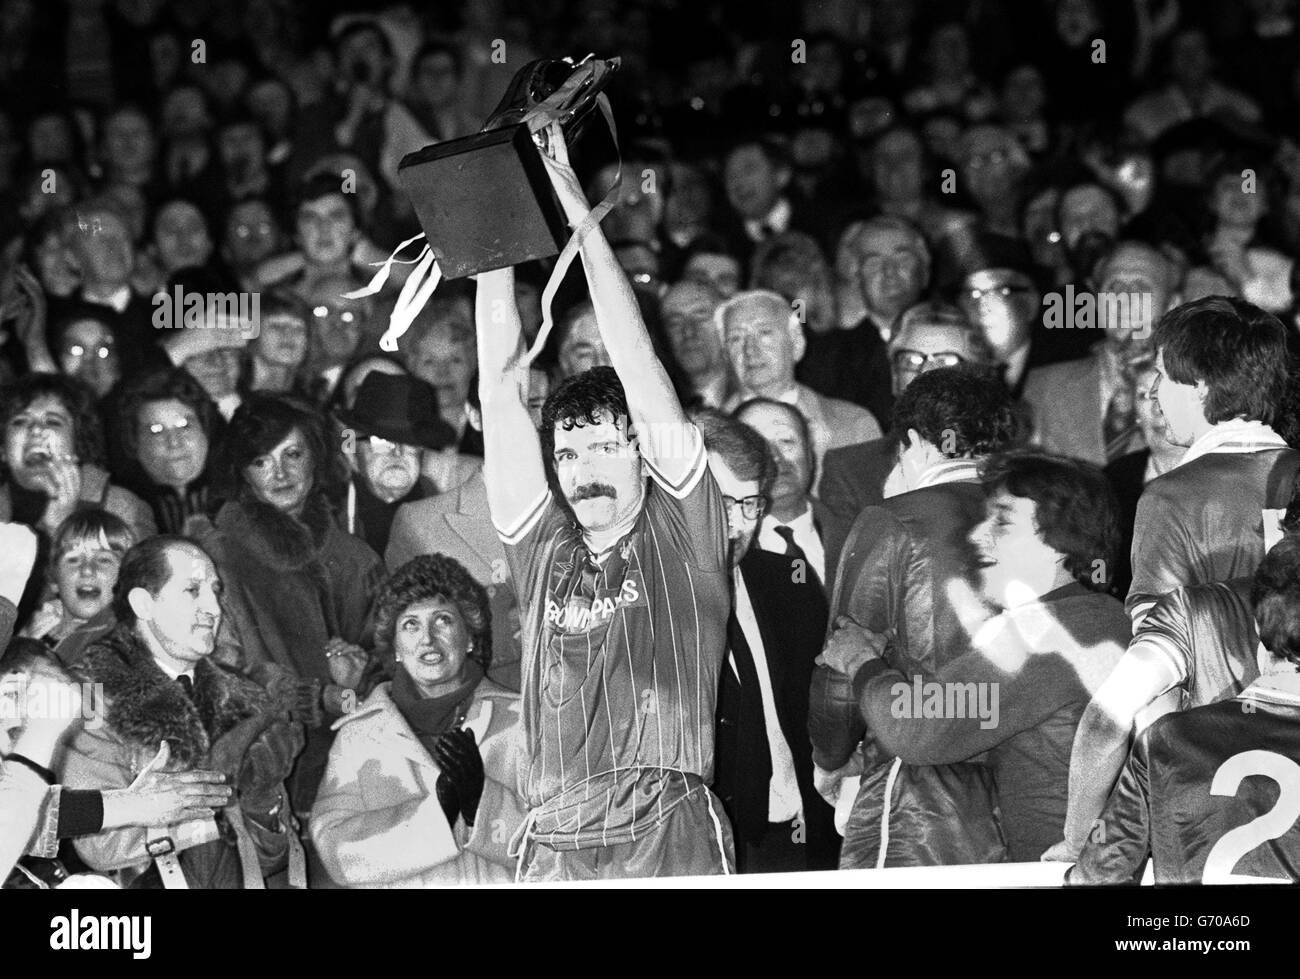 Jubilant Graeme Souness holds aloft the Milk Cup trophy after his side beat their Merseyside rivals Everton 1-0 in the replay of the Milk Cup final at Maine Road, Manchester. Souness scored the only goal in the 22nd minute to give Liverpool their fourth League Cup win. Stock Photo